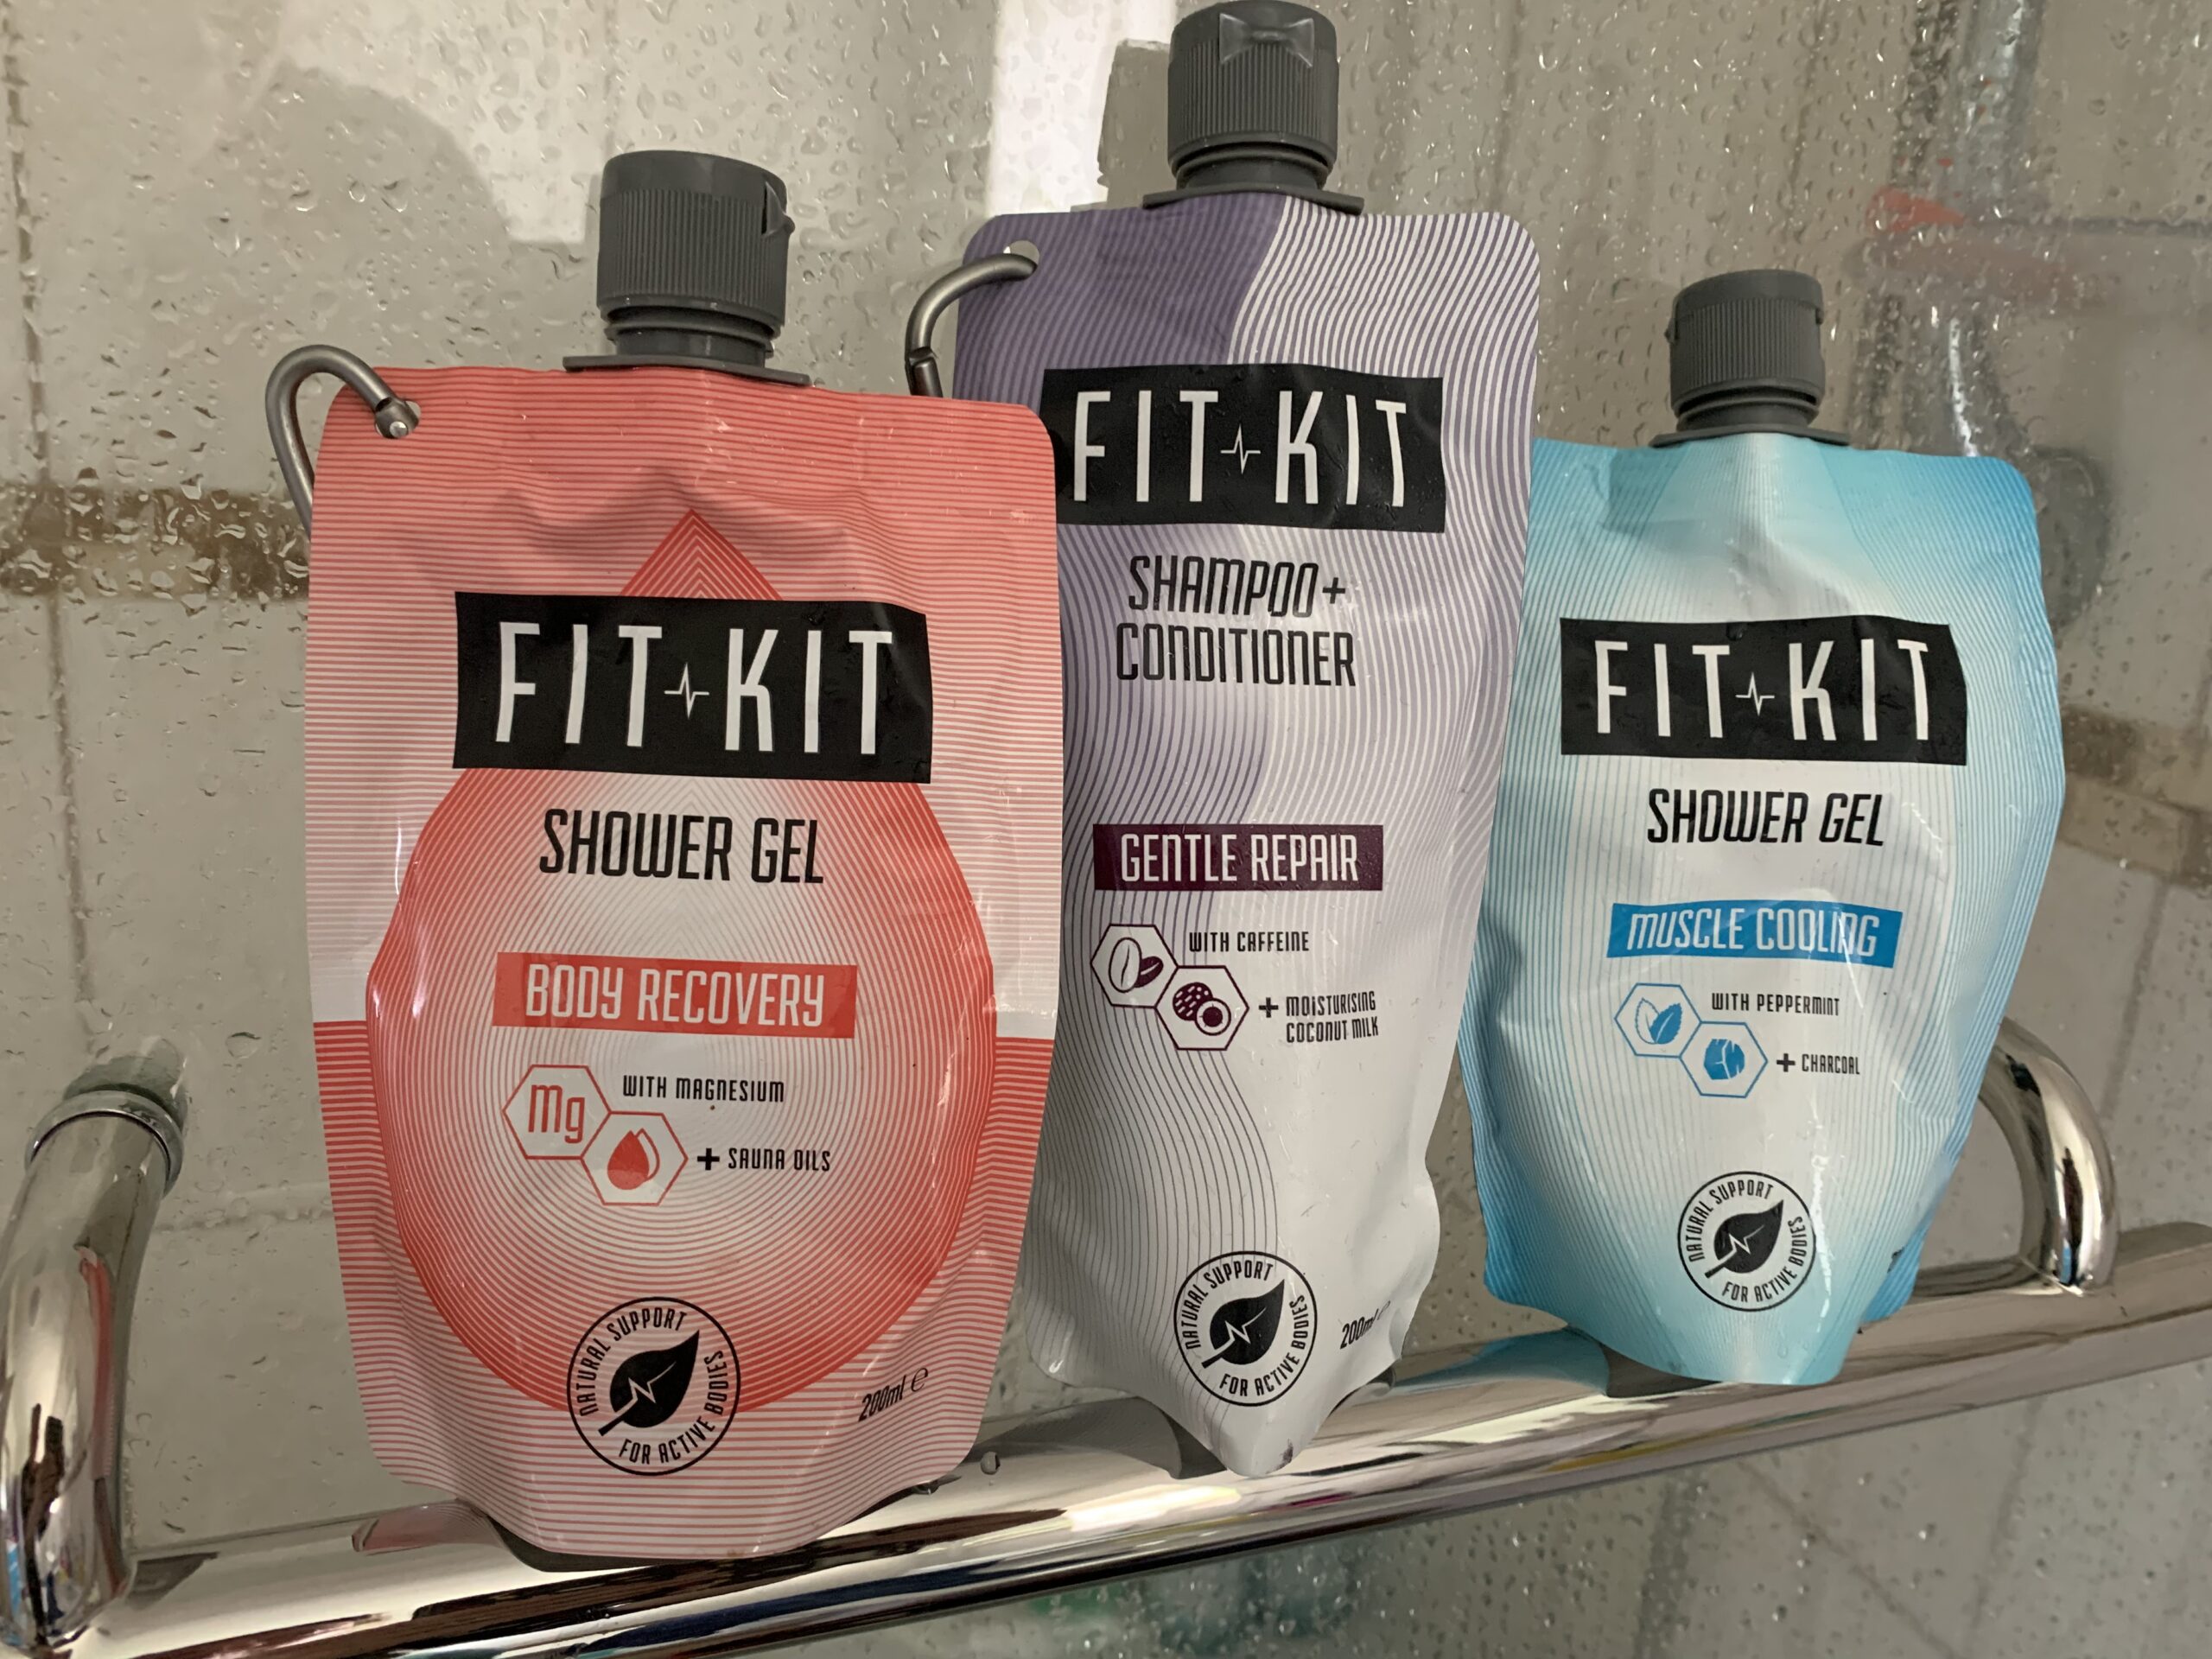 Post Exercise Recovery Kit from Fit Kit Bodycare